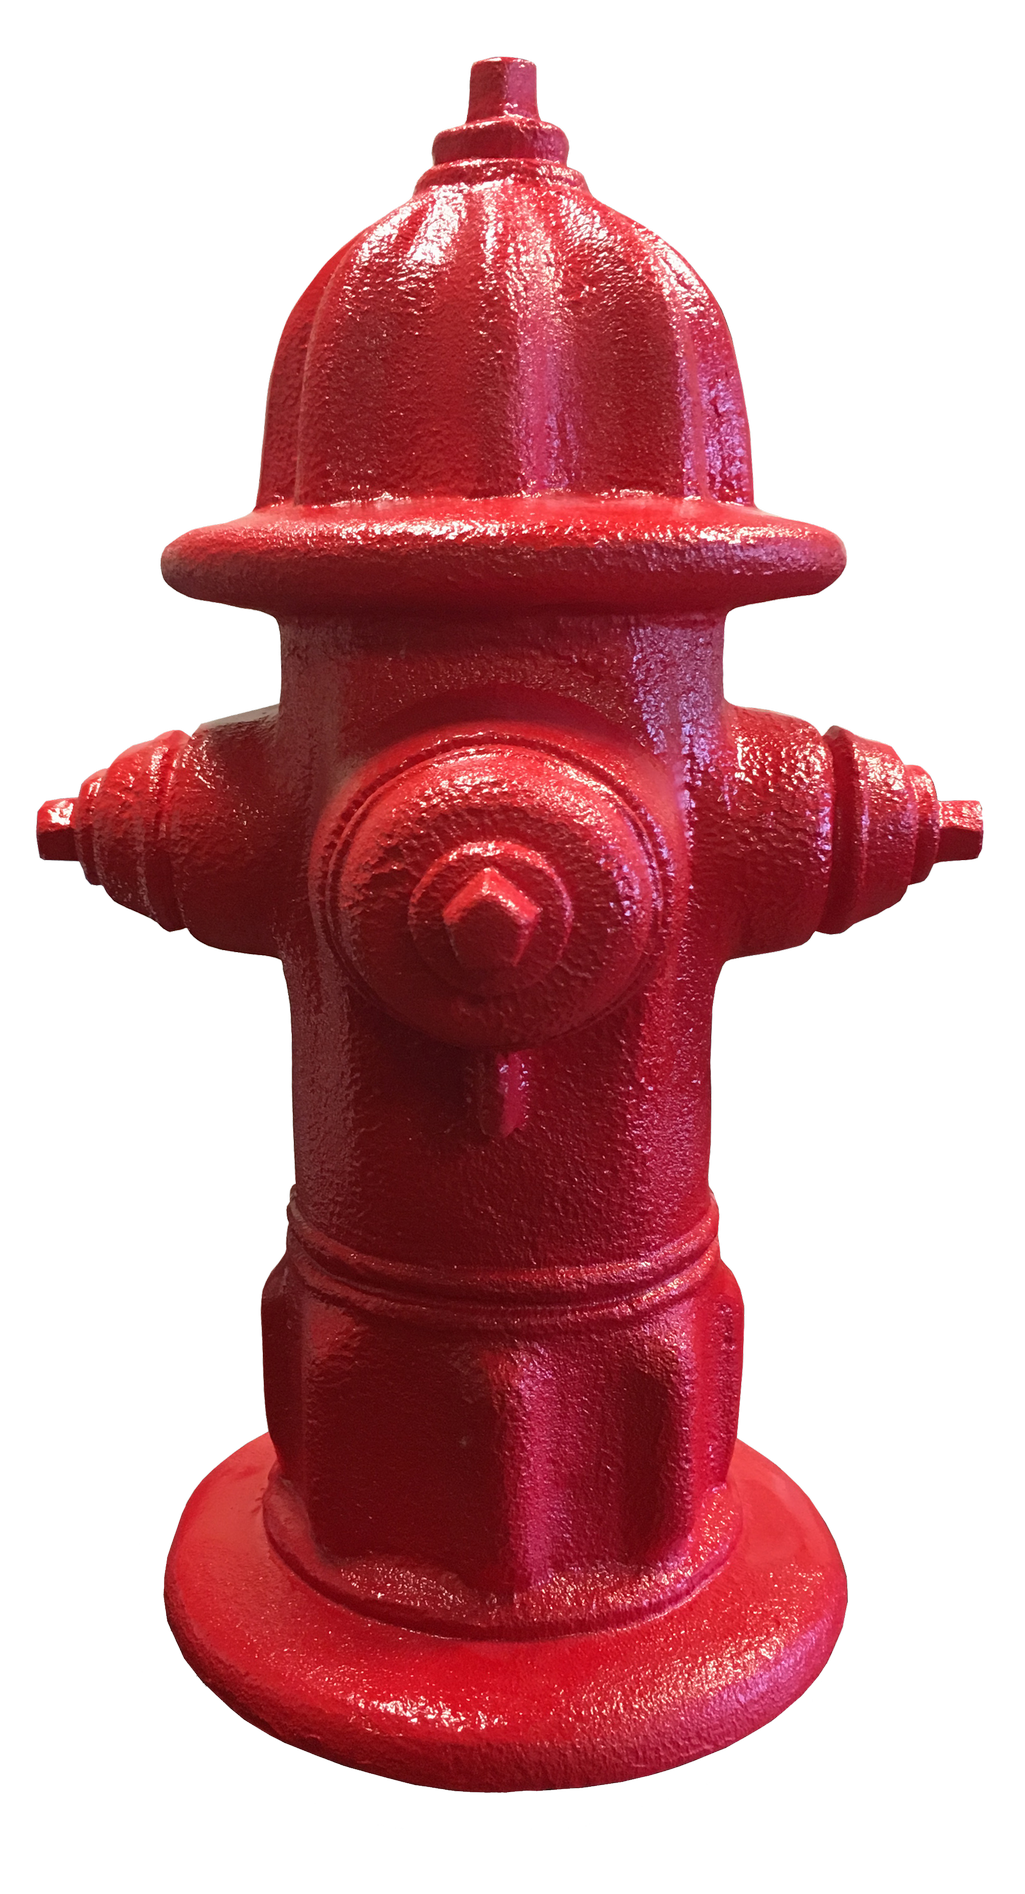 Fire Hydrant Old PNG Photos